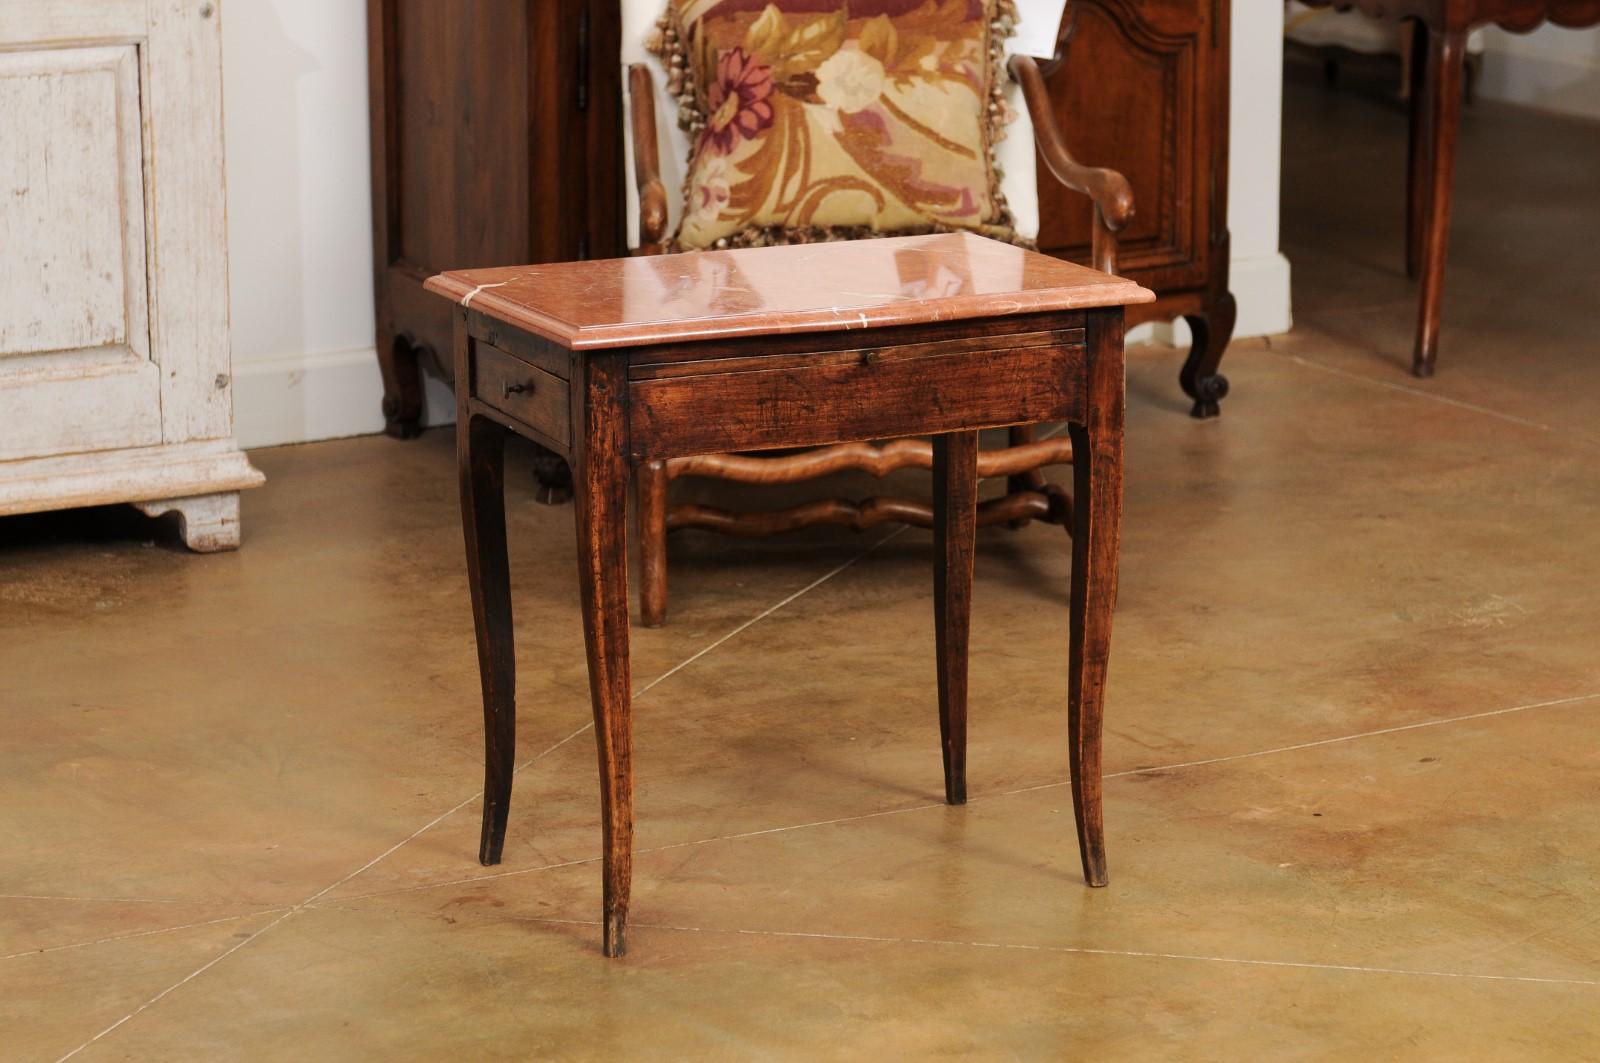 A French Napoléon III period side table from the late 19th century, with red marble top, two drawers and pull-out. Created in France at the end of emperor Napoléon III's reign, this side table features a red veined marble top with serpentine front,